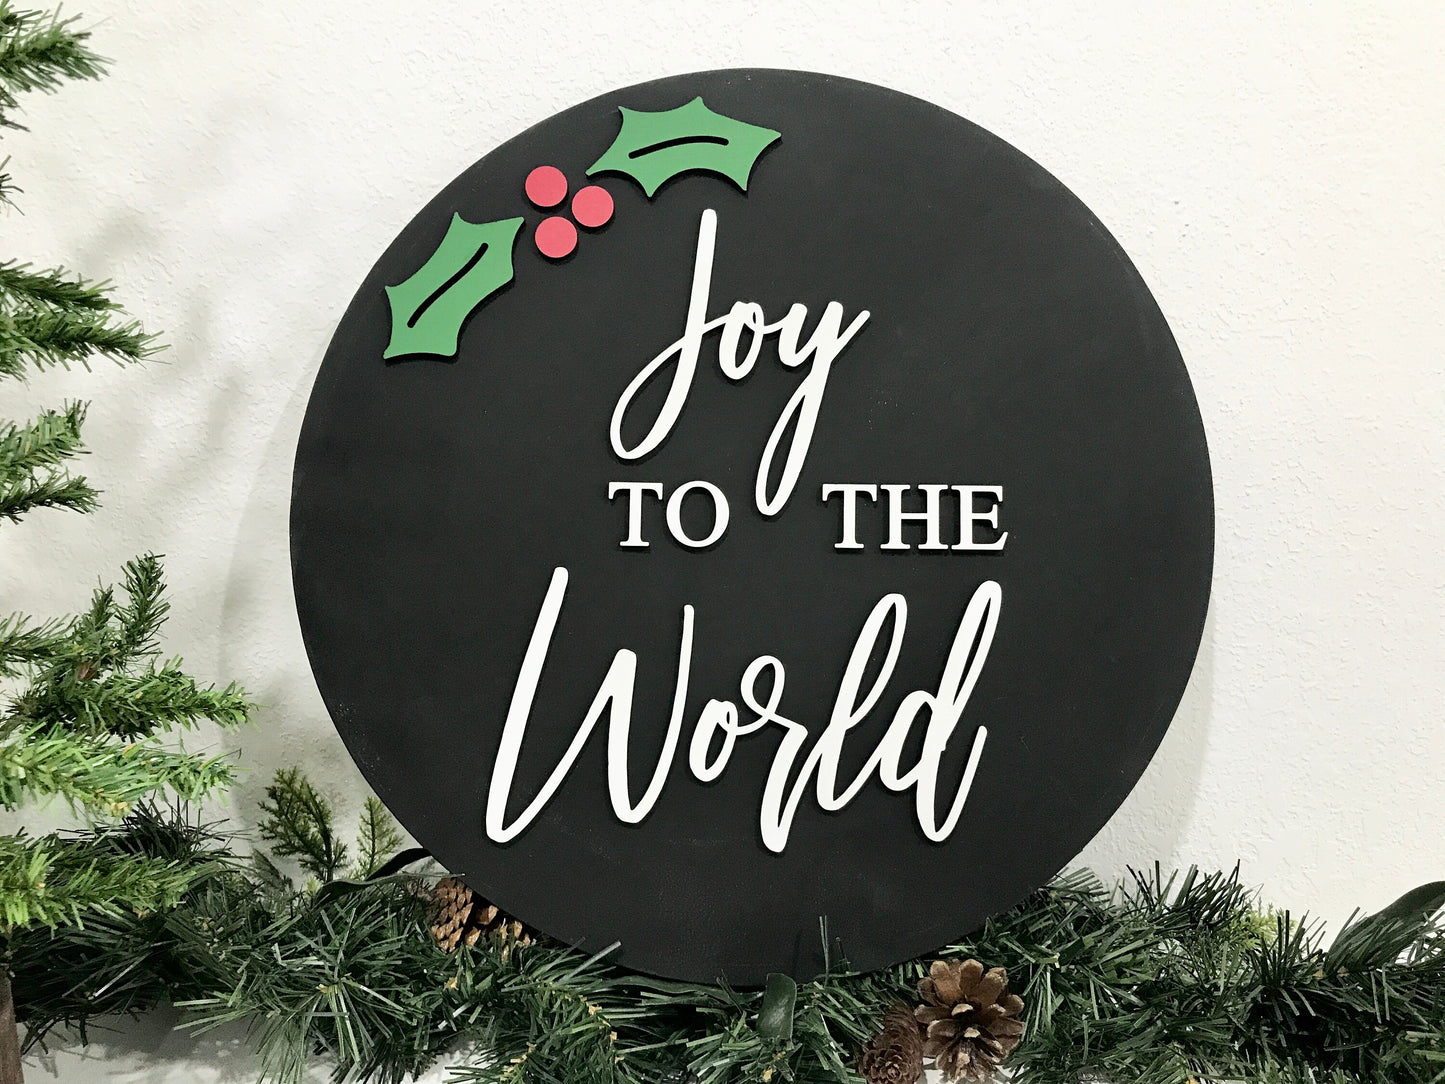 Joy to the world sign, Christmas decorations, 3D holiday decor, wood signs, living room wooden sign wall hanging, holly leaves mantel decor